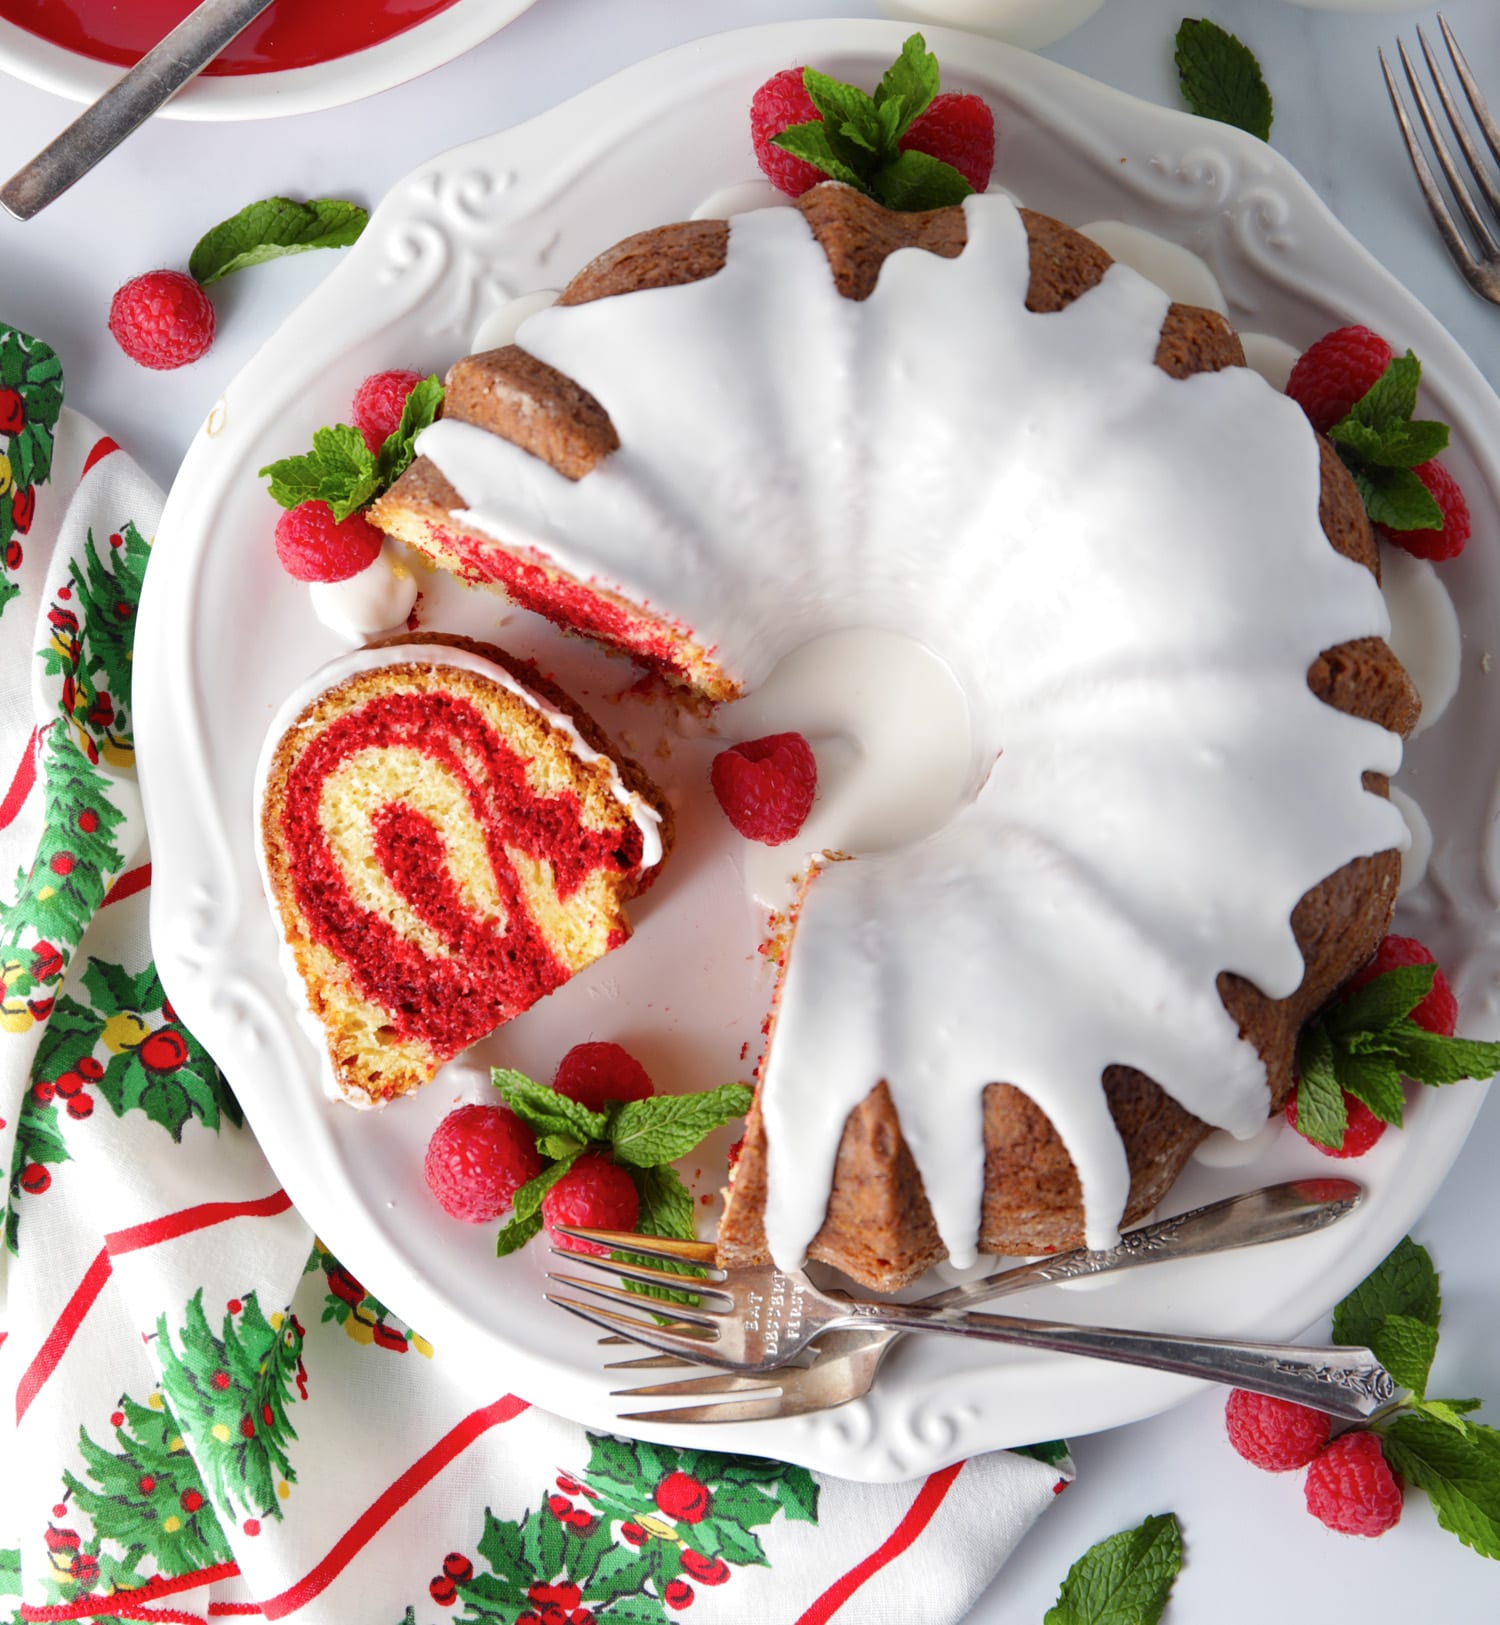 Christmas Bundt Cake - A Festive Red and Green Holiday Cake!